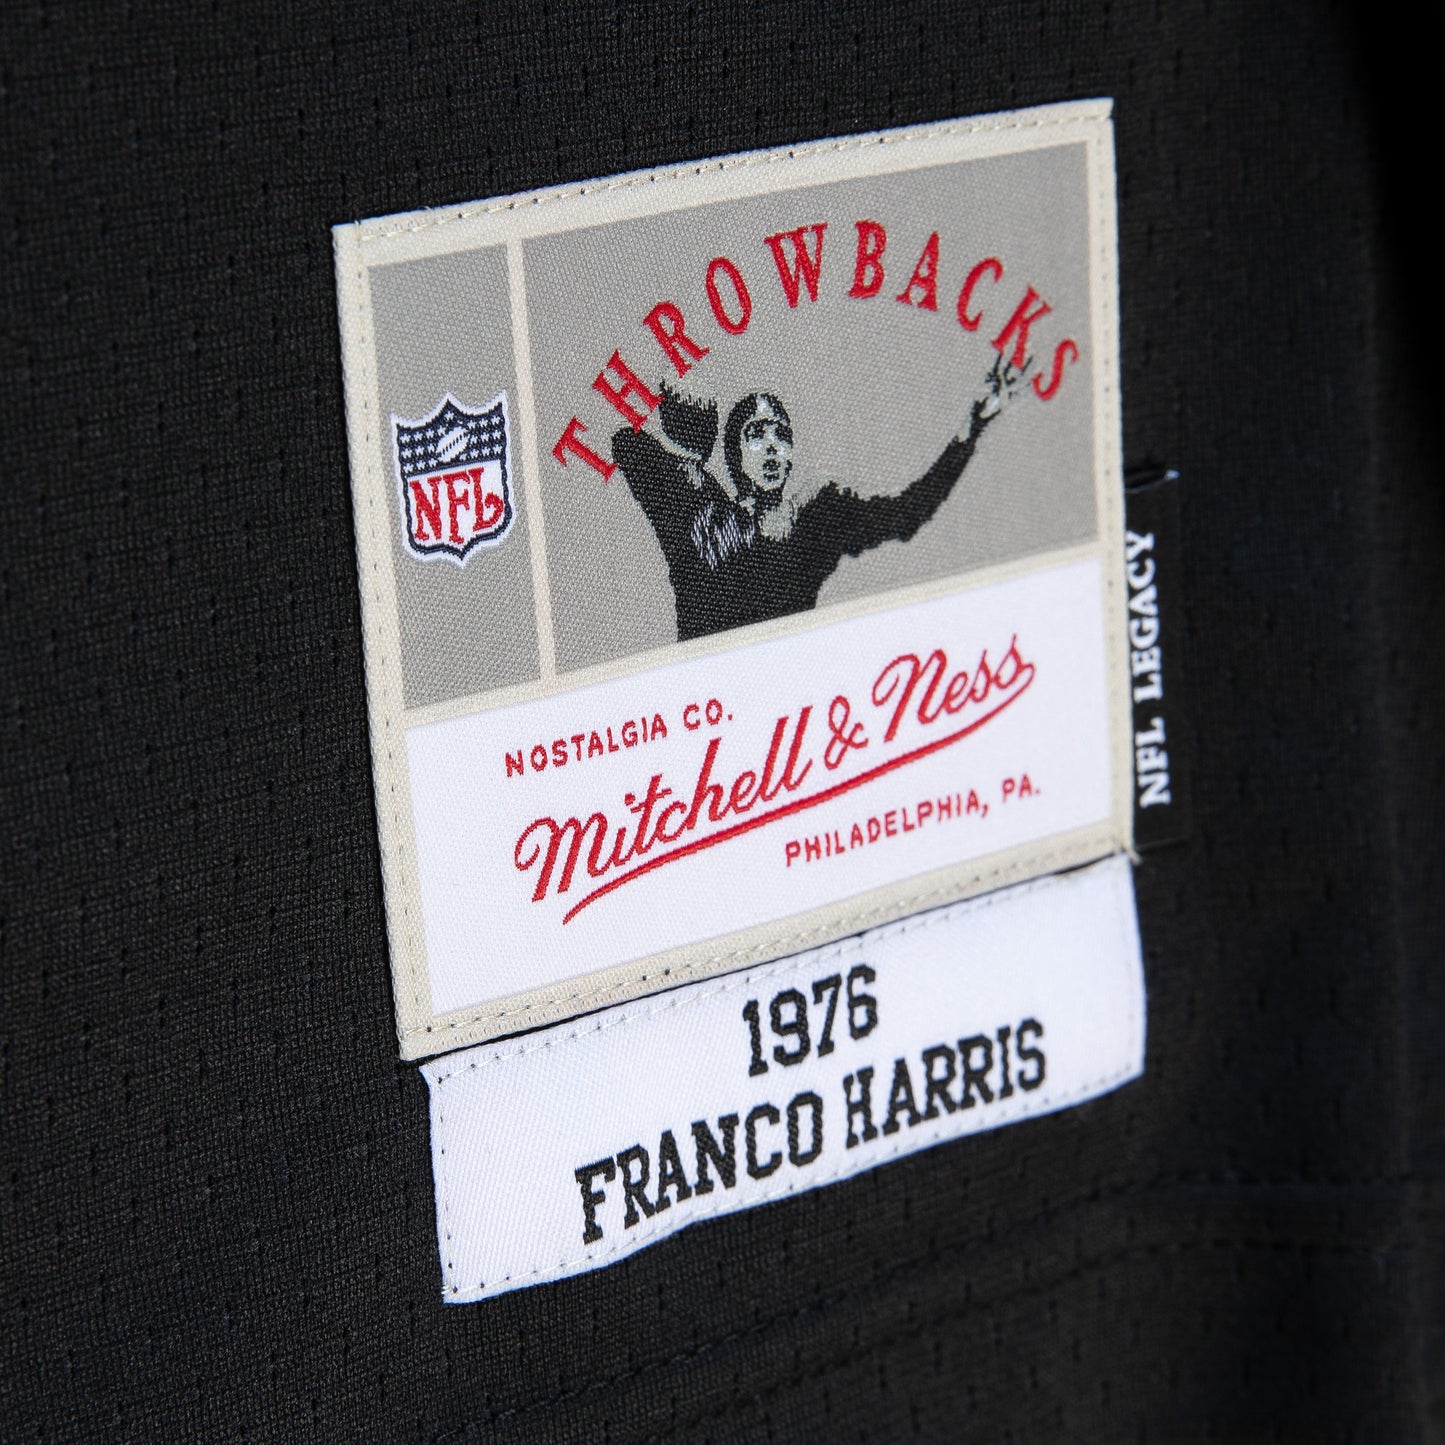 Pittsburgh Steelers Mitchell & Ness Franco Harris #32 1967 Black Legacy Jersey